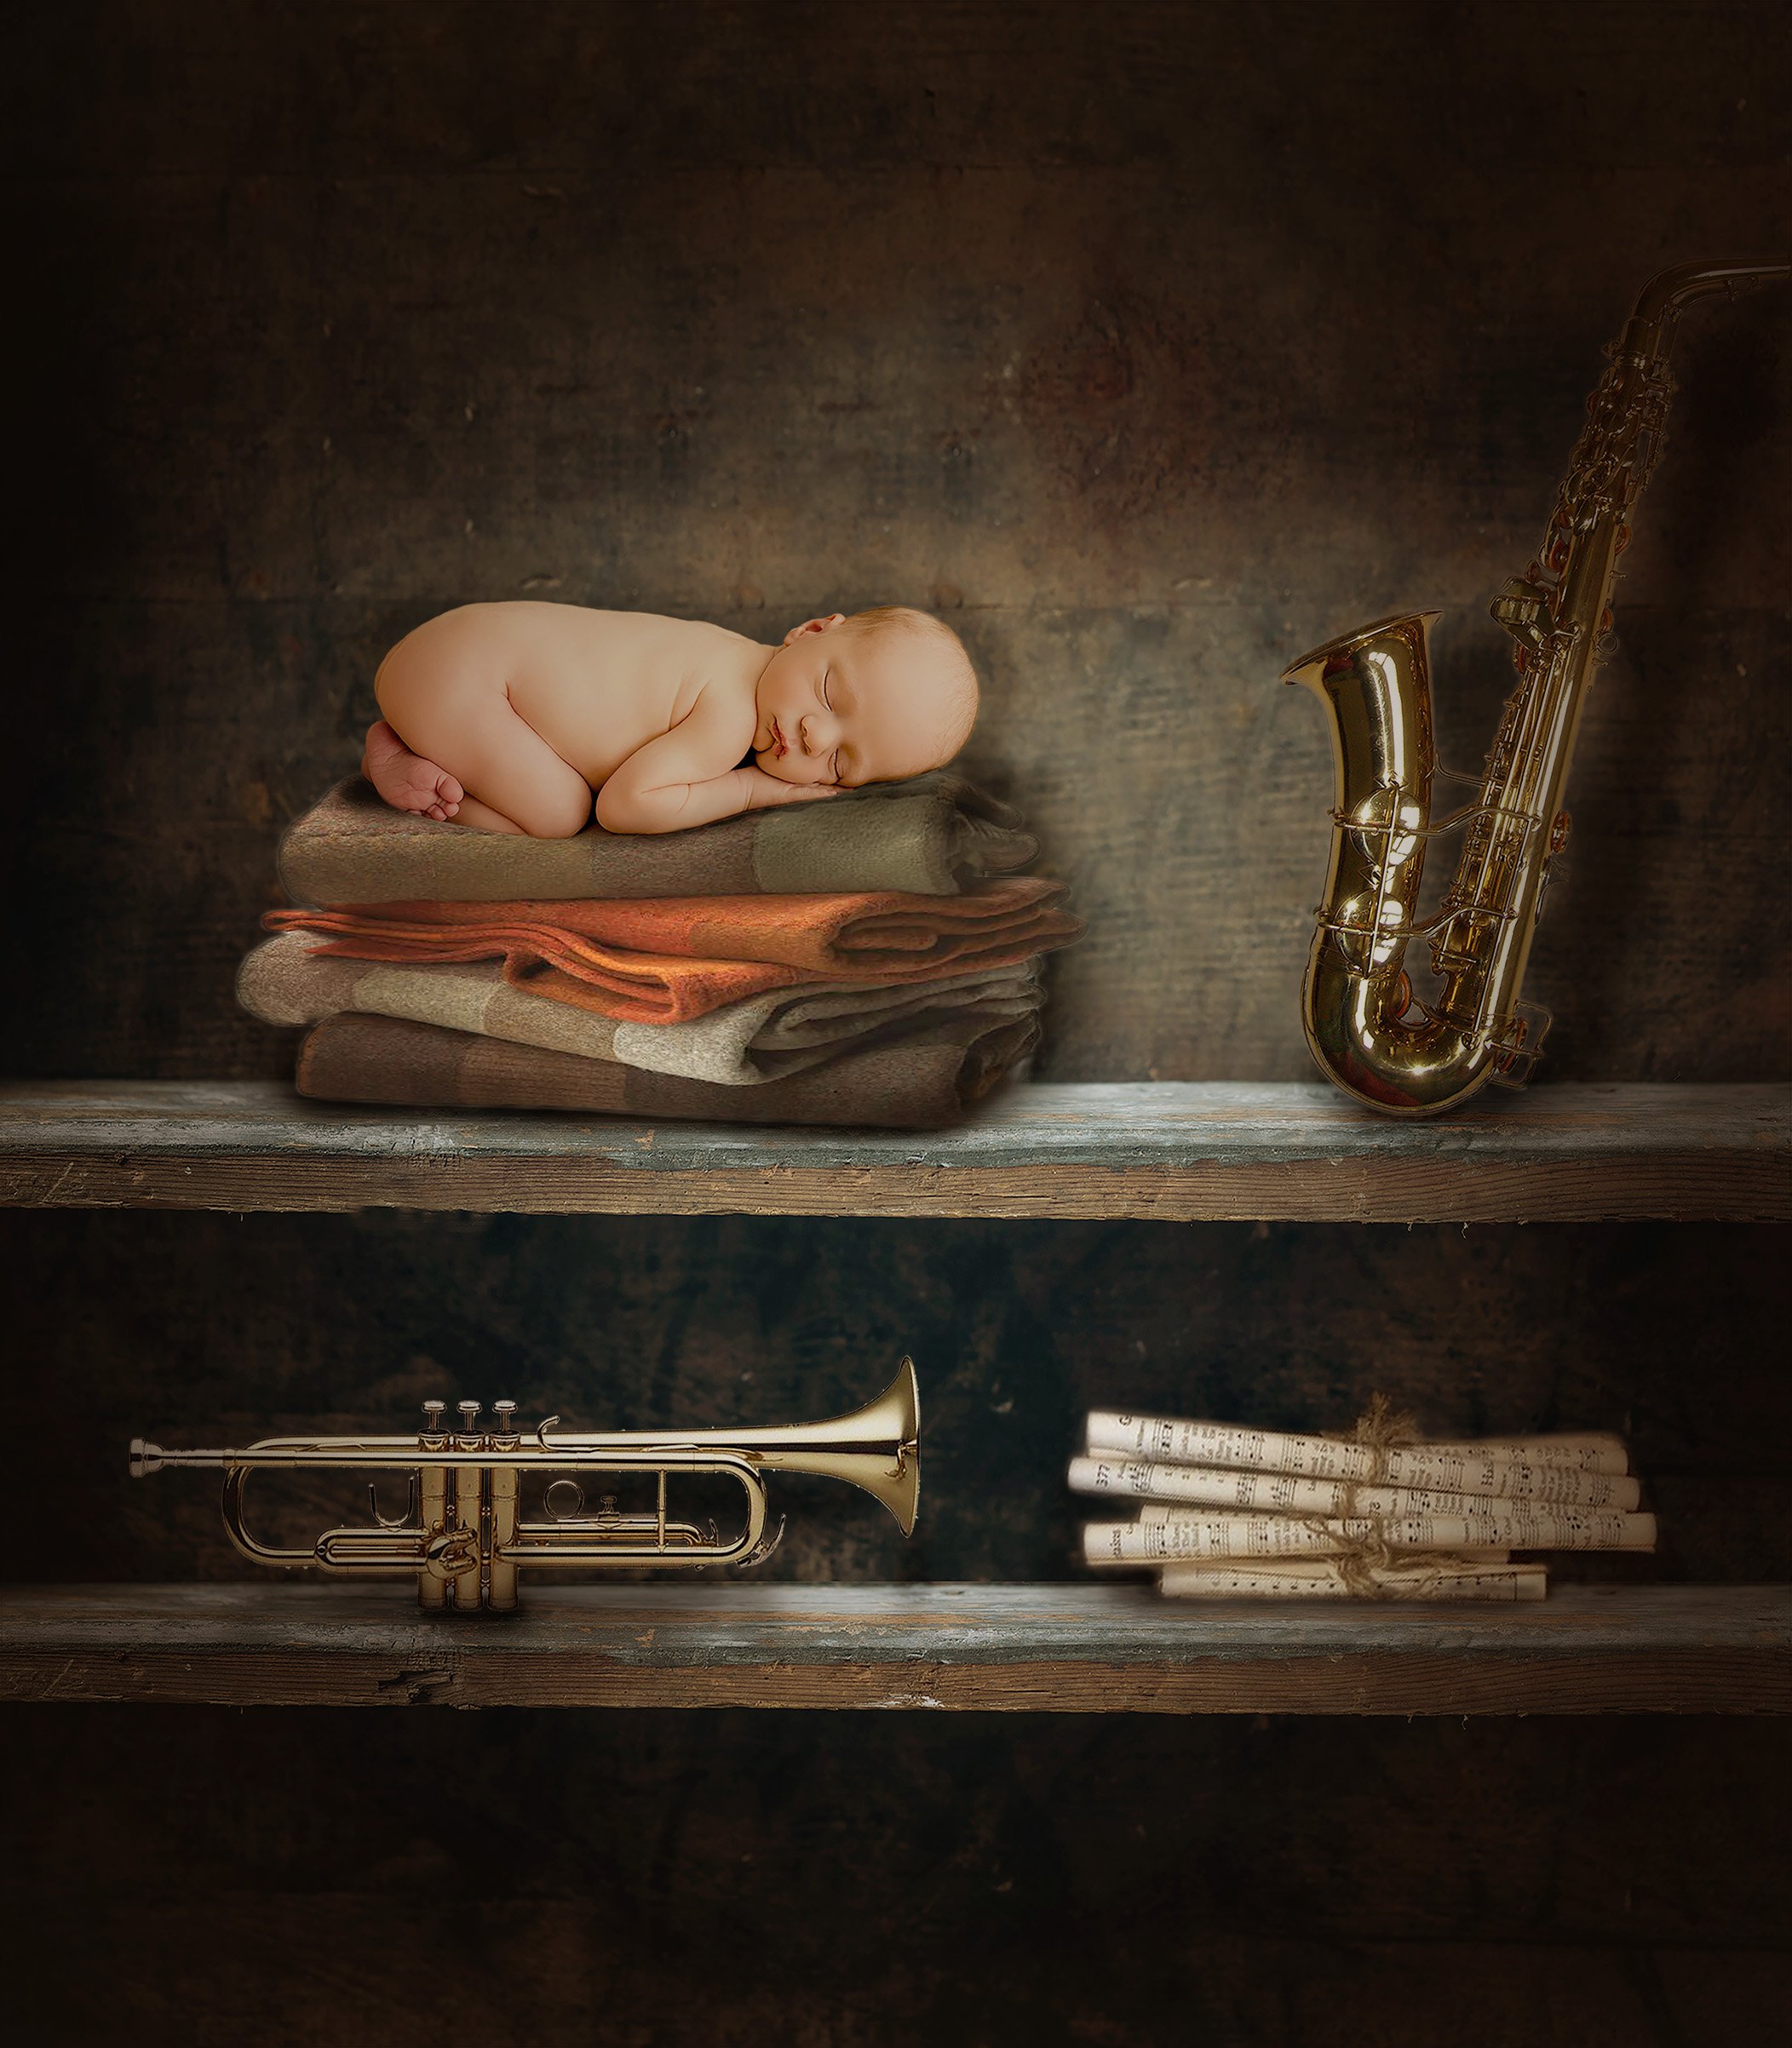 Newborn baby sleeping on a pile of blankets near a trumpet saxophone and rolls of music